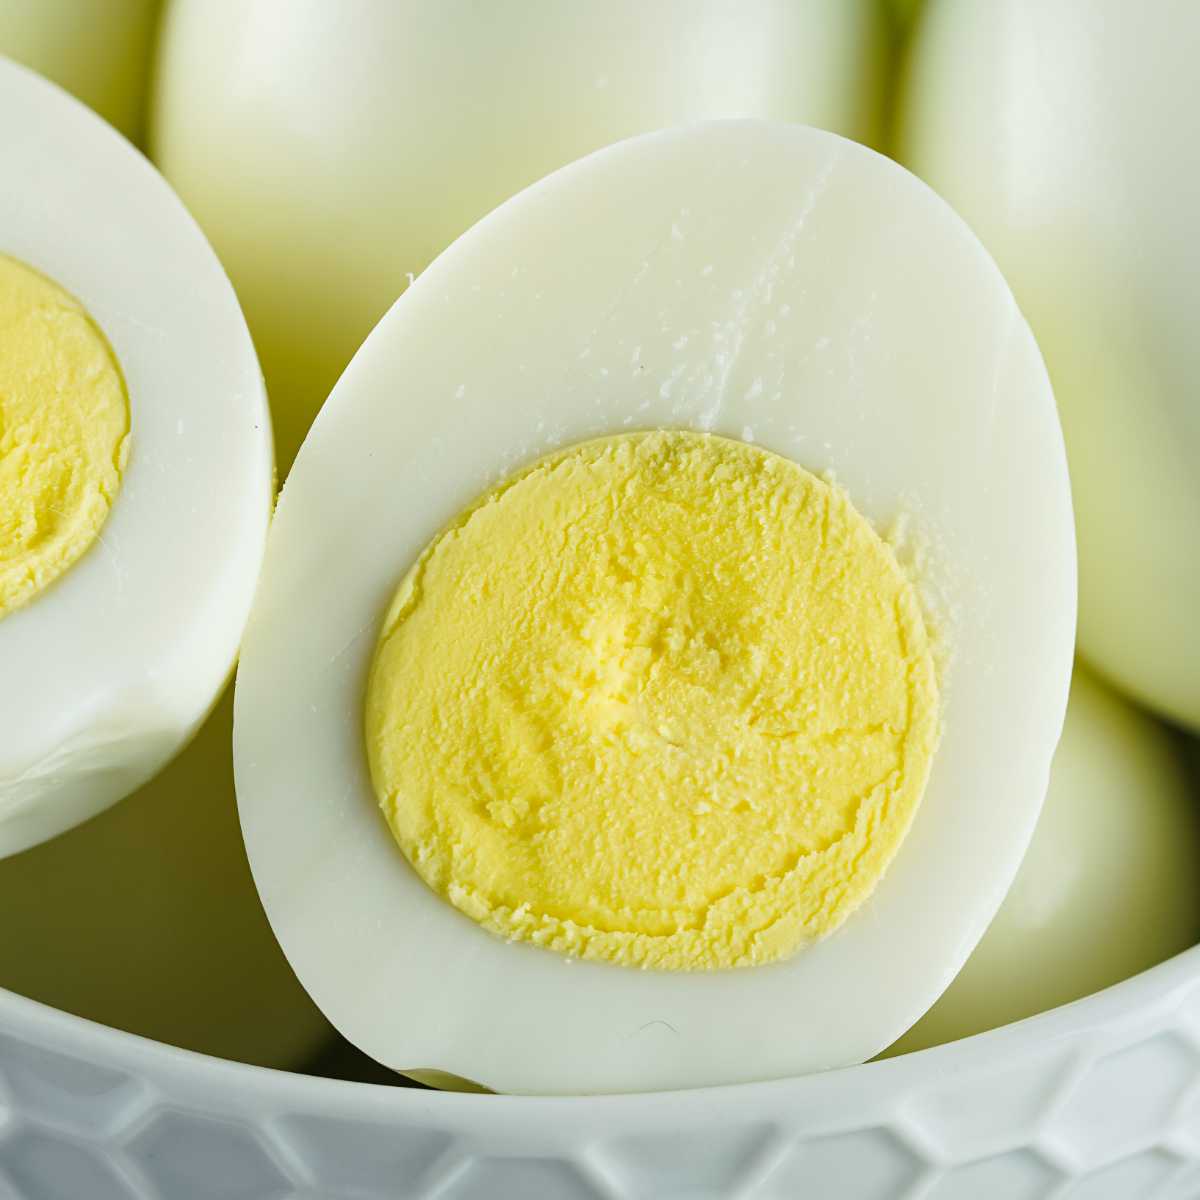 perfect hard boiled egg made in a Ninja Foodie instant pot.